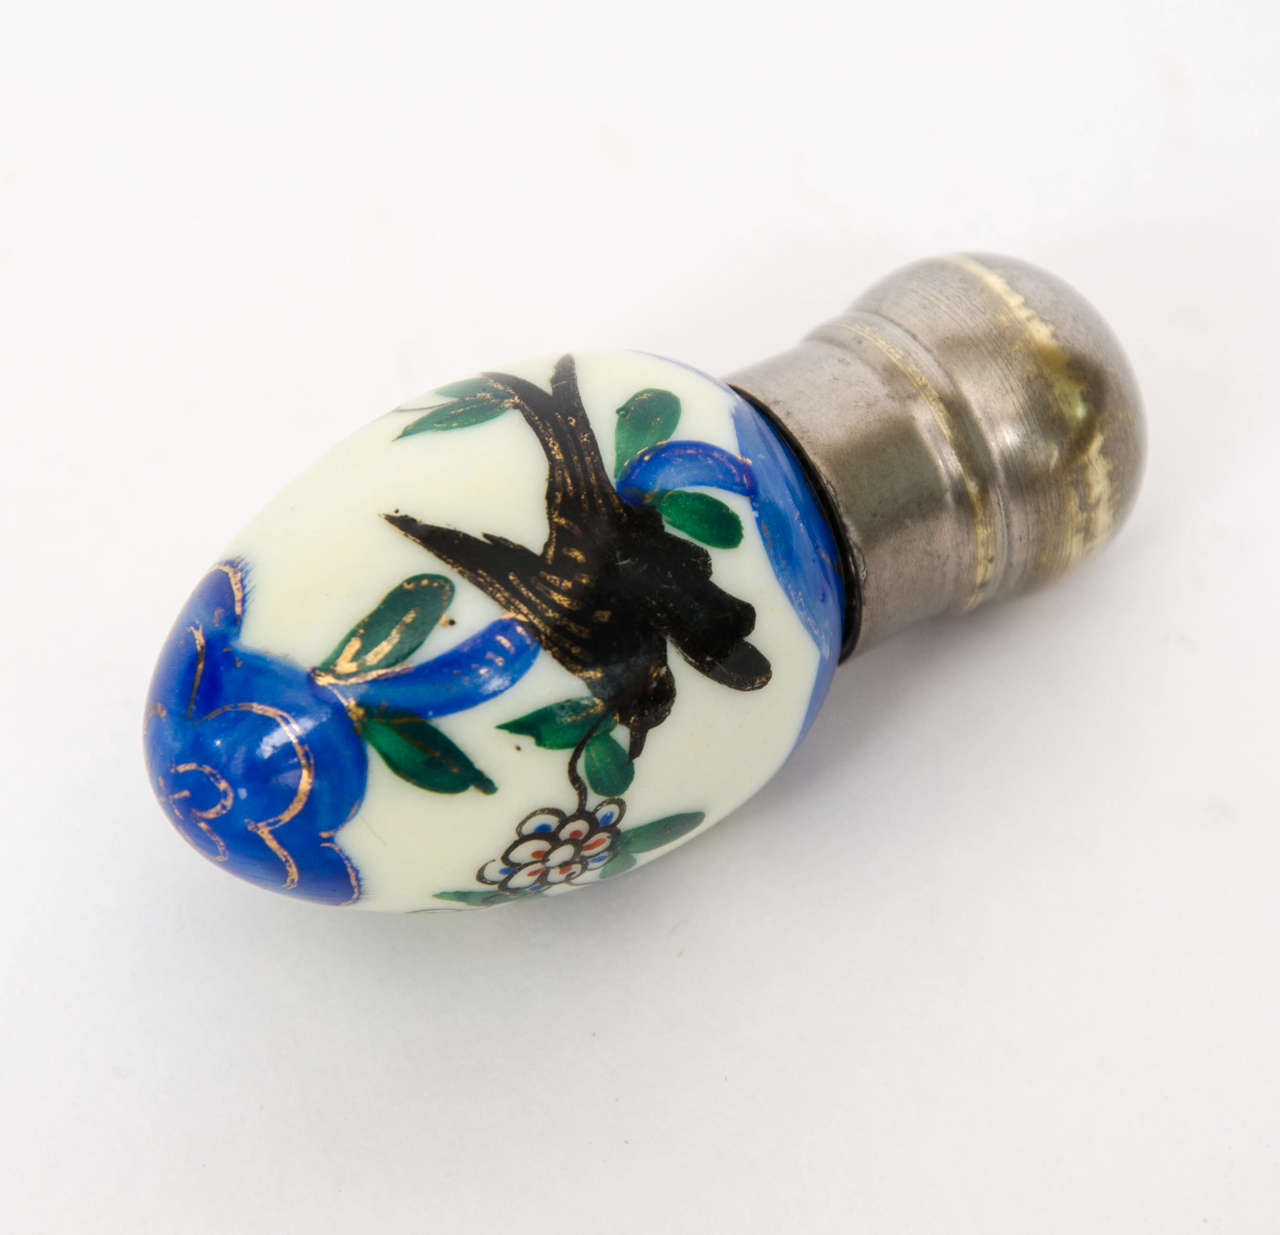 This is a fine perfume bottle by James Macintyre & Co. of Burslem, England.

The porcelain bottle is in the shape of an egg with a pewter screw cap top.

The bottle is beautifully hand enamelled with birds in a floral woodland setting, with